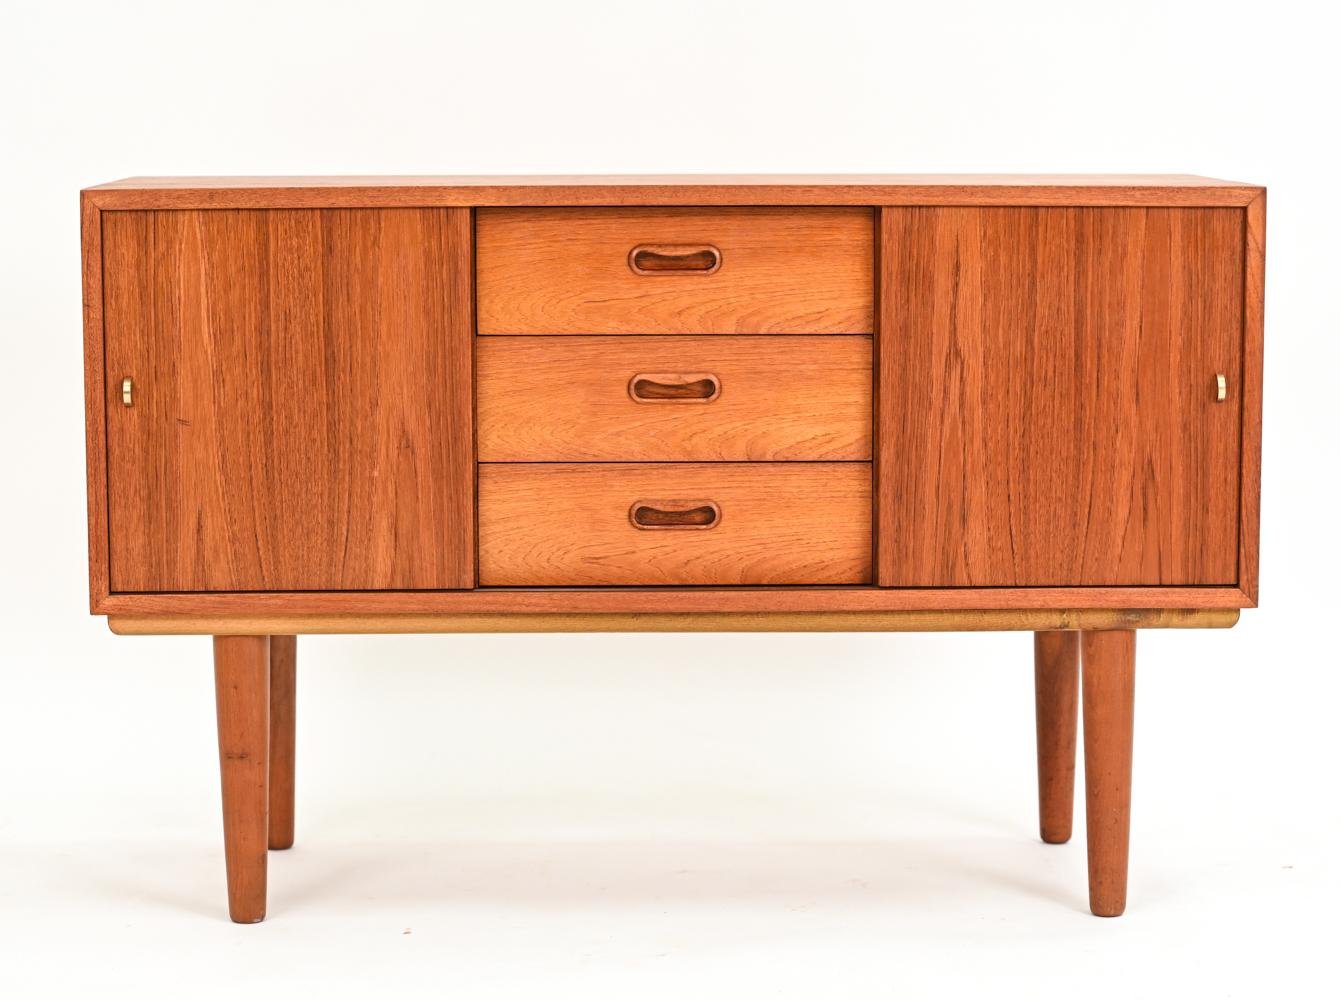 A diminutive apartment-scale sideboard or low chest in the manner of Kai Kristiansen. This charming Danish mid-century cabinet features three dovetailed drawers with shaped recessed pulls flanked by two sliding doors with brass half-moon handles.